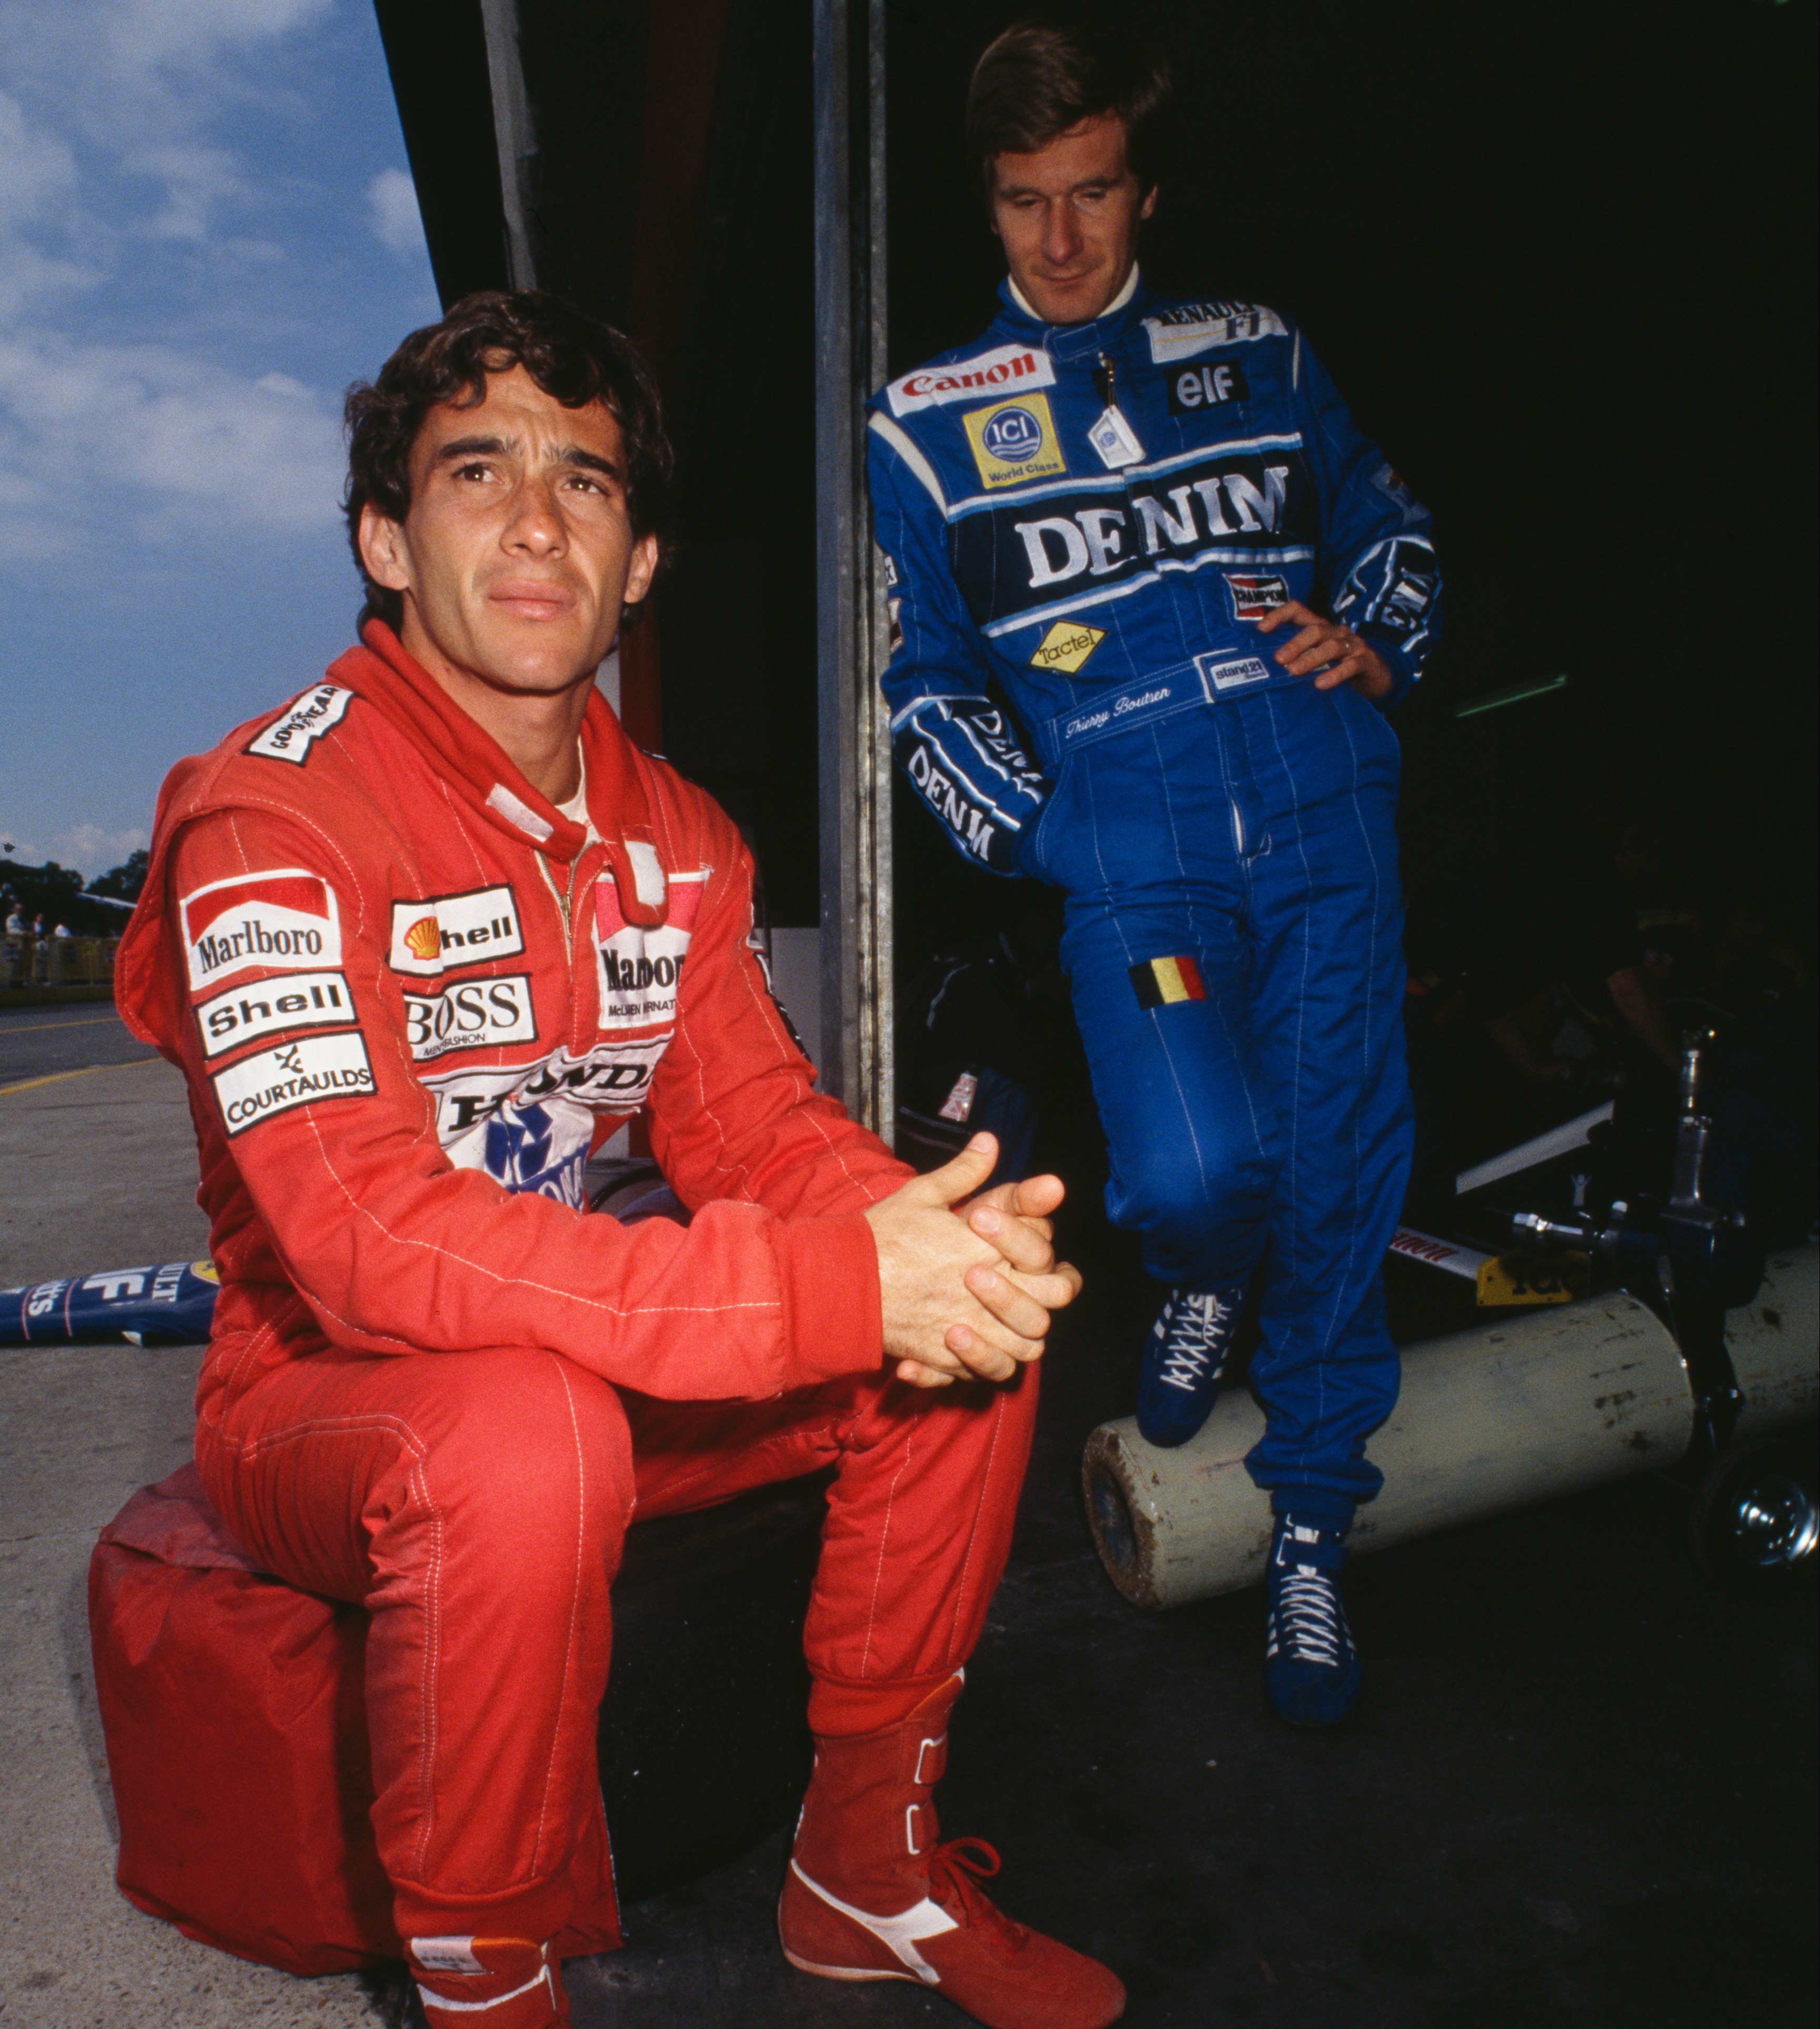 Senna is one of just 10 drivers to have won three or more world championships